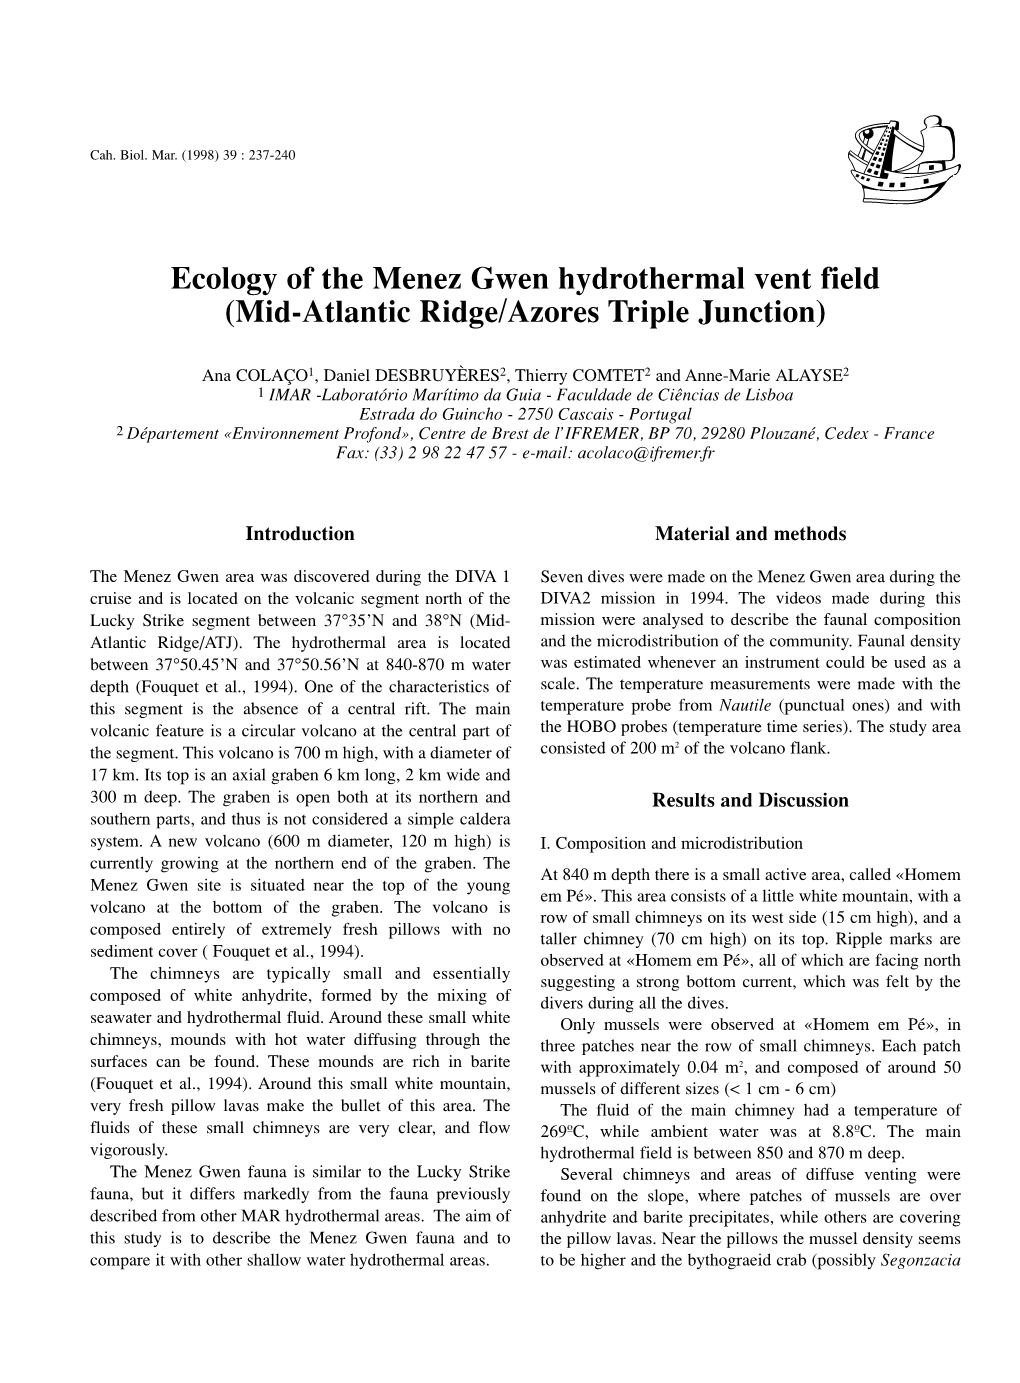 Ecology of the Menez Gwen Hydrothermal Vent Field (Mid-Atlantic Ridge/Azores Triple Junction)